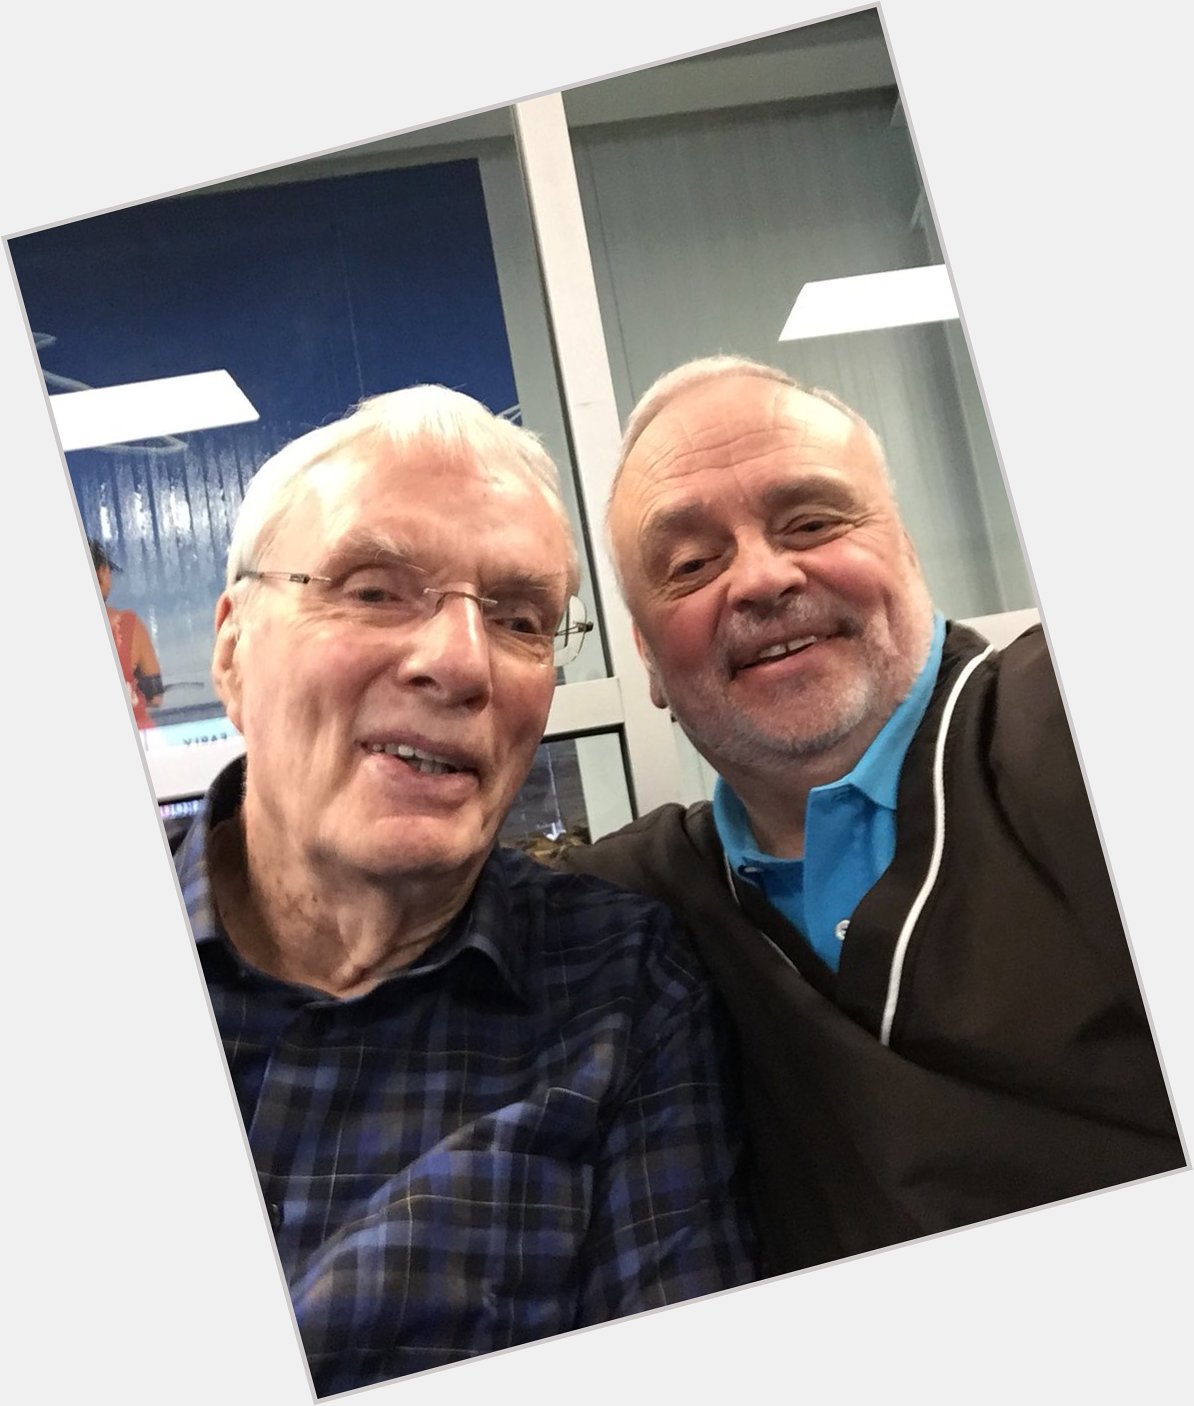 Happy Birthday to my buddy and GOAT Hubie Brown! Such an honor to work with and call him my friend. 